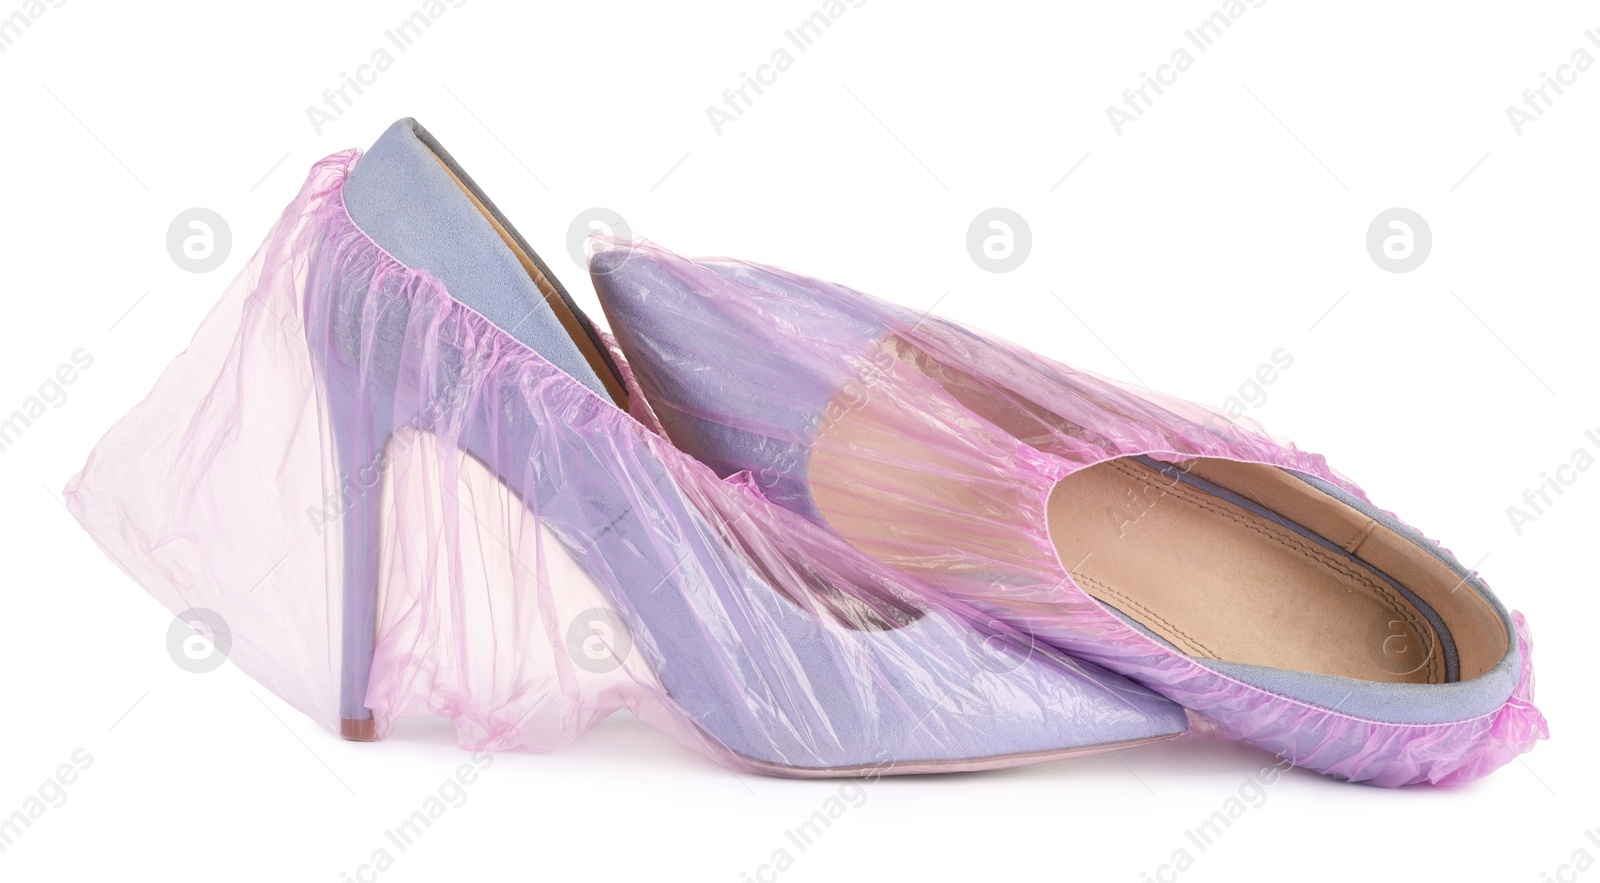 Photo of High heels in pink shoe covers isolated on white